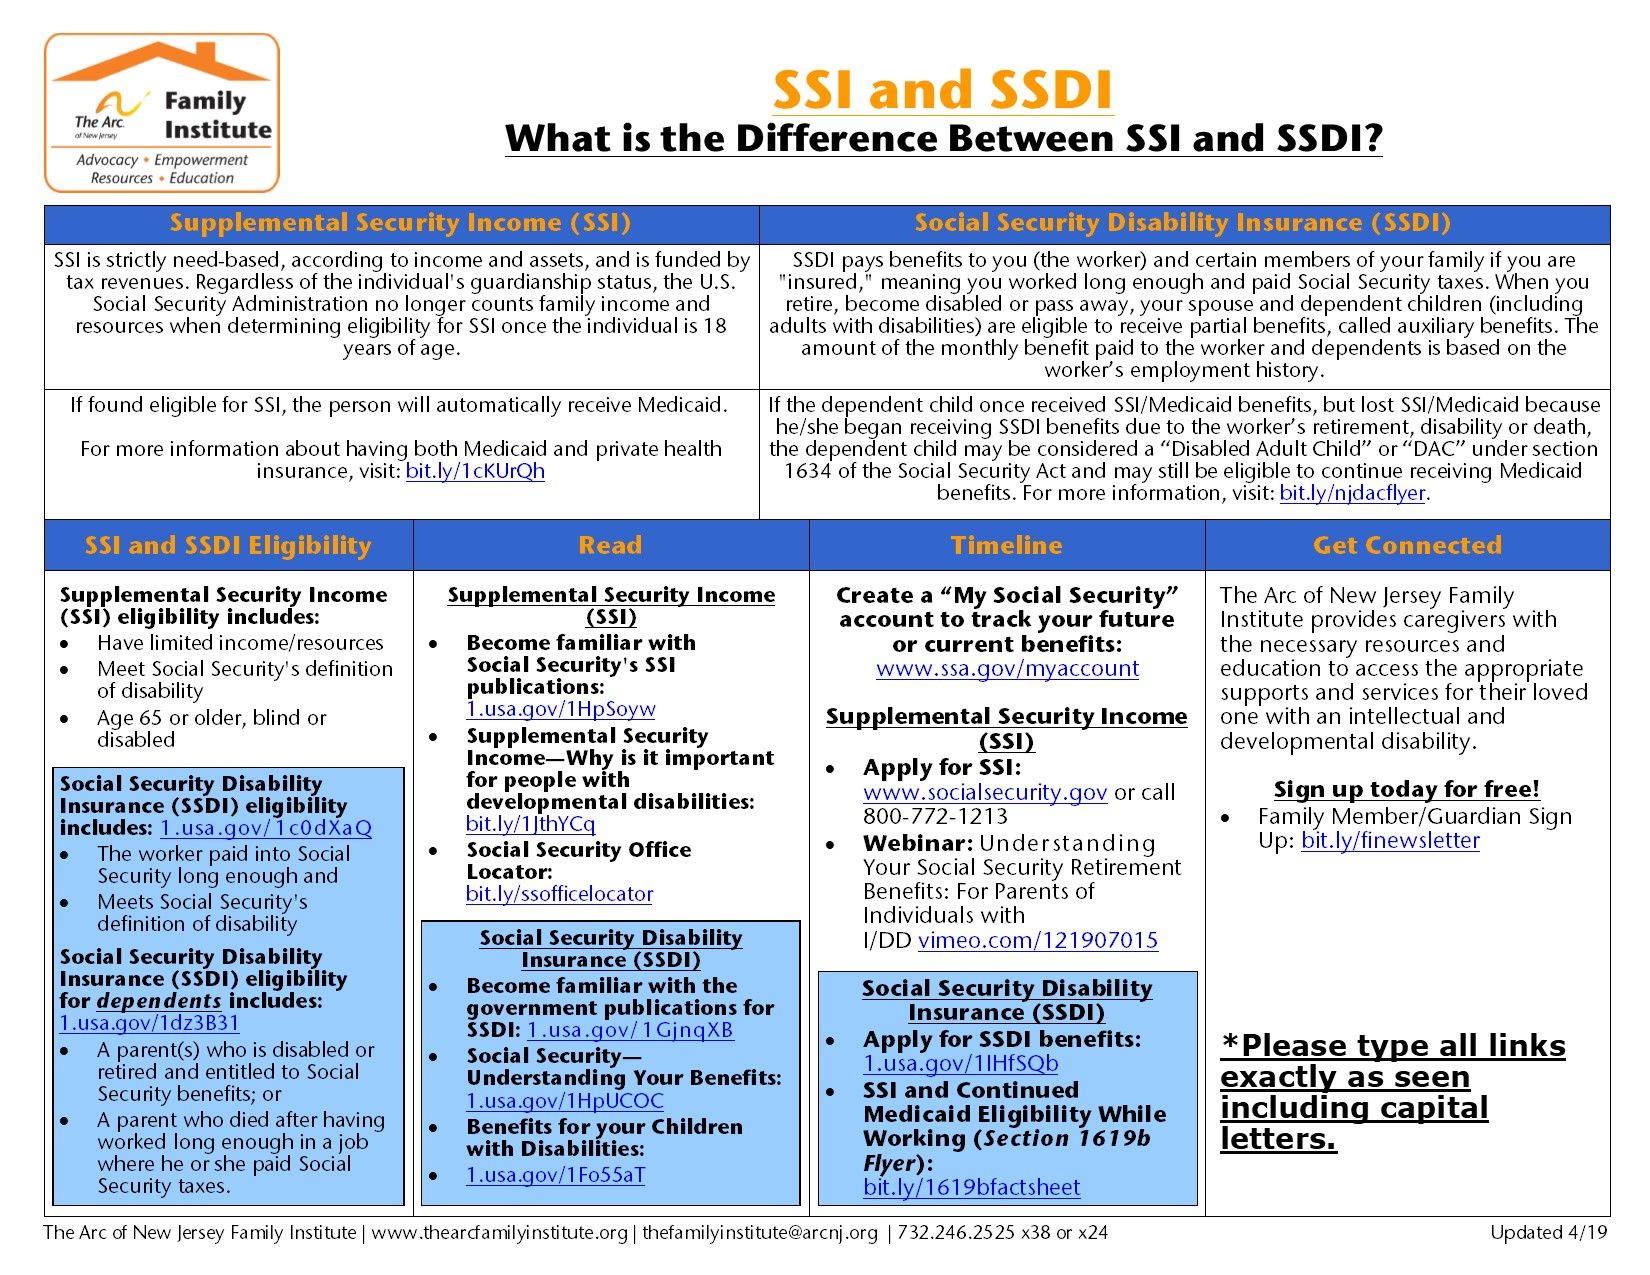 SSI and SSDI: What is the difference?